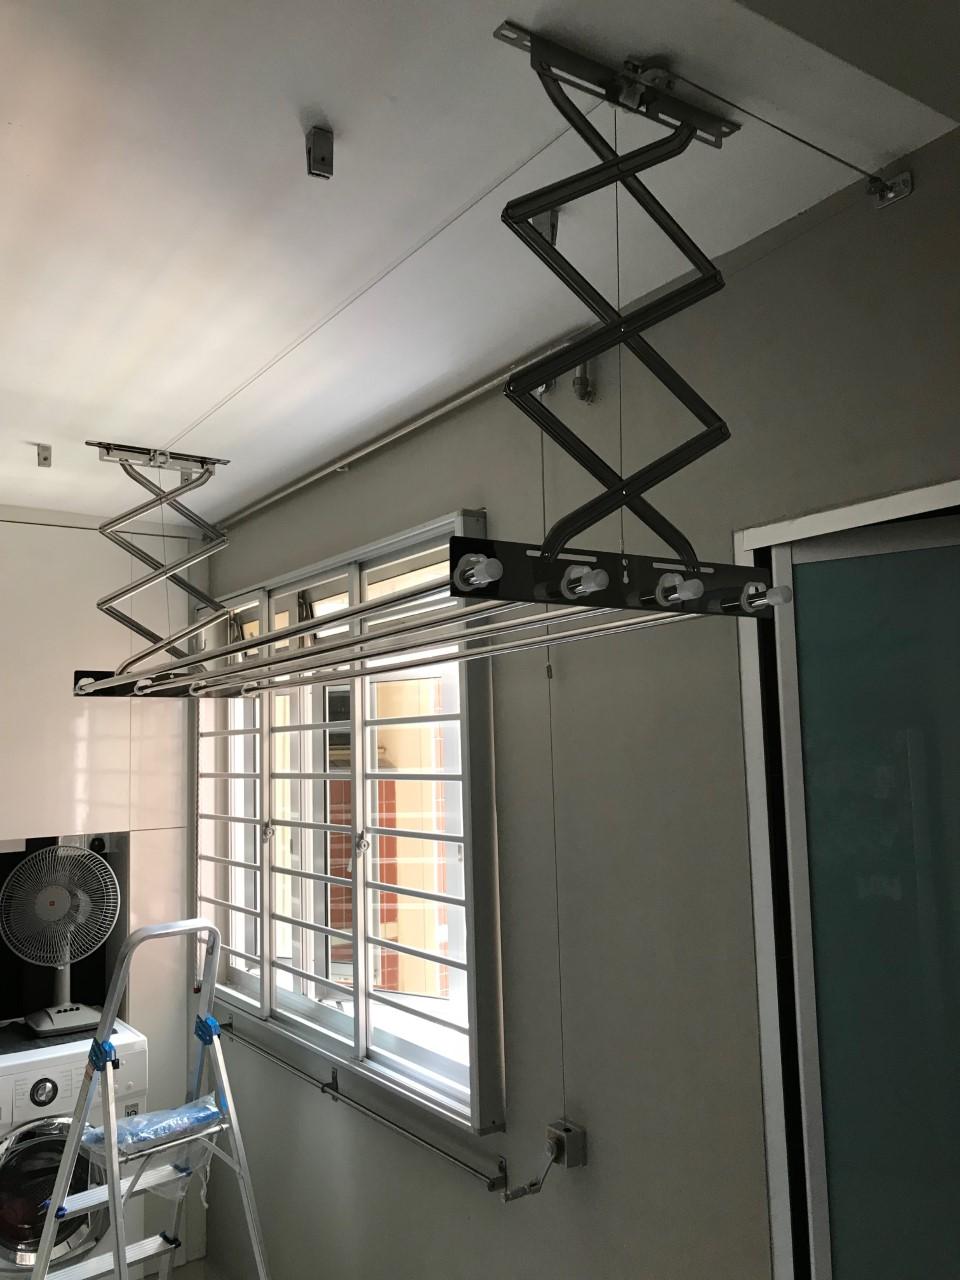 Winch System Laundry Drying Rack Laundry Rack Clothes Drying Rack Ceiiling Laundry Rack With Free Installation On Concrete Ceiling